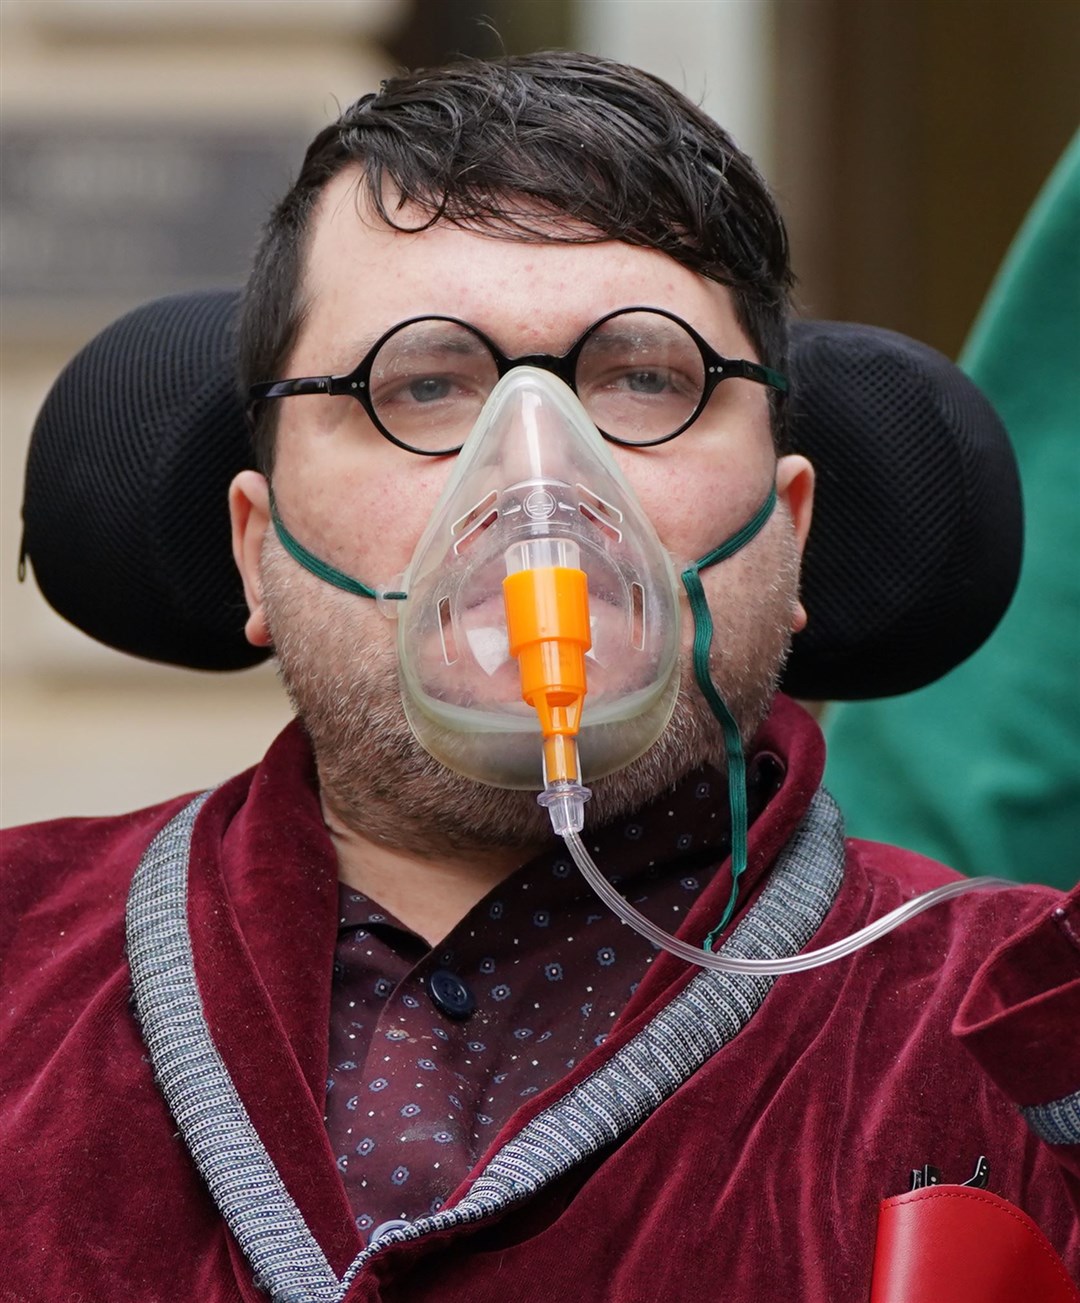 Nicholas Rossi lost a battle over his identity in November 2022 (Andrew Milligan/PA)